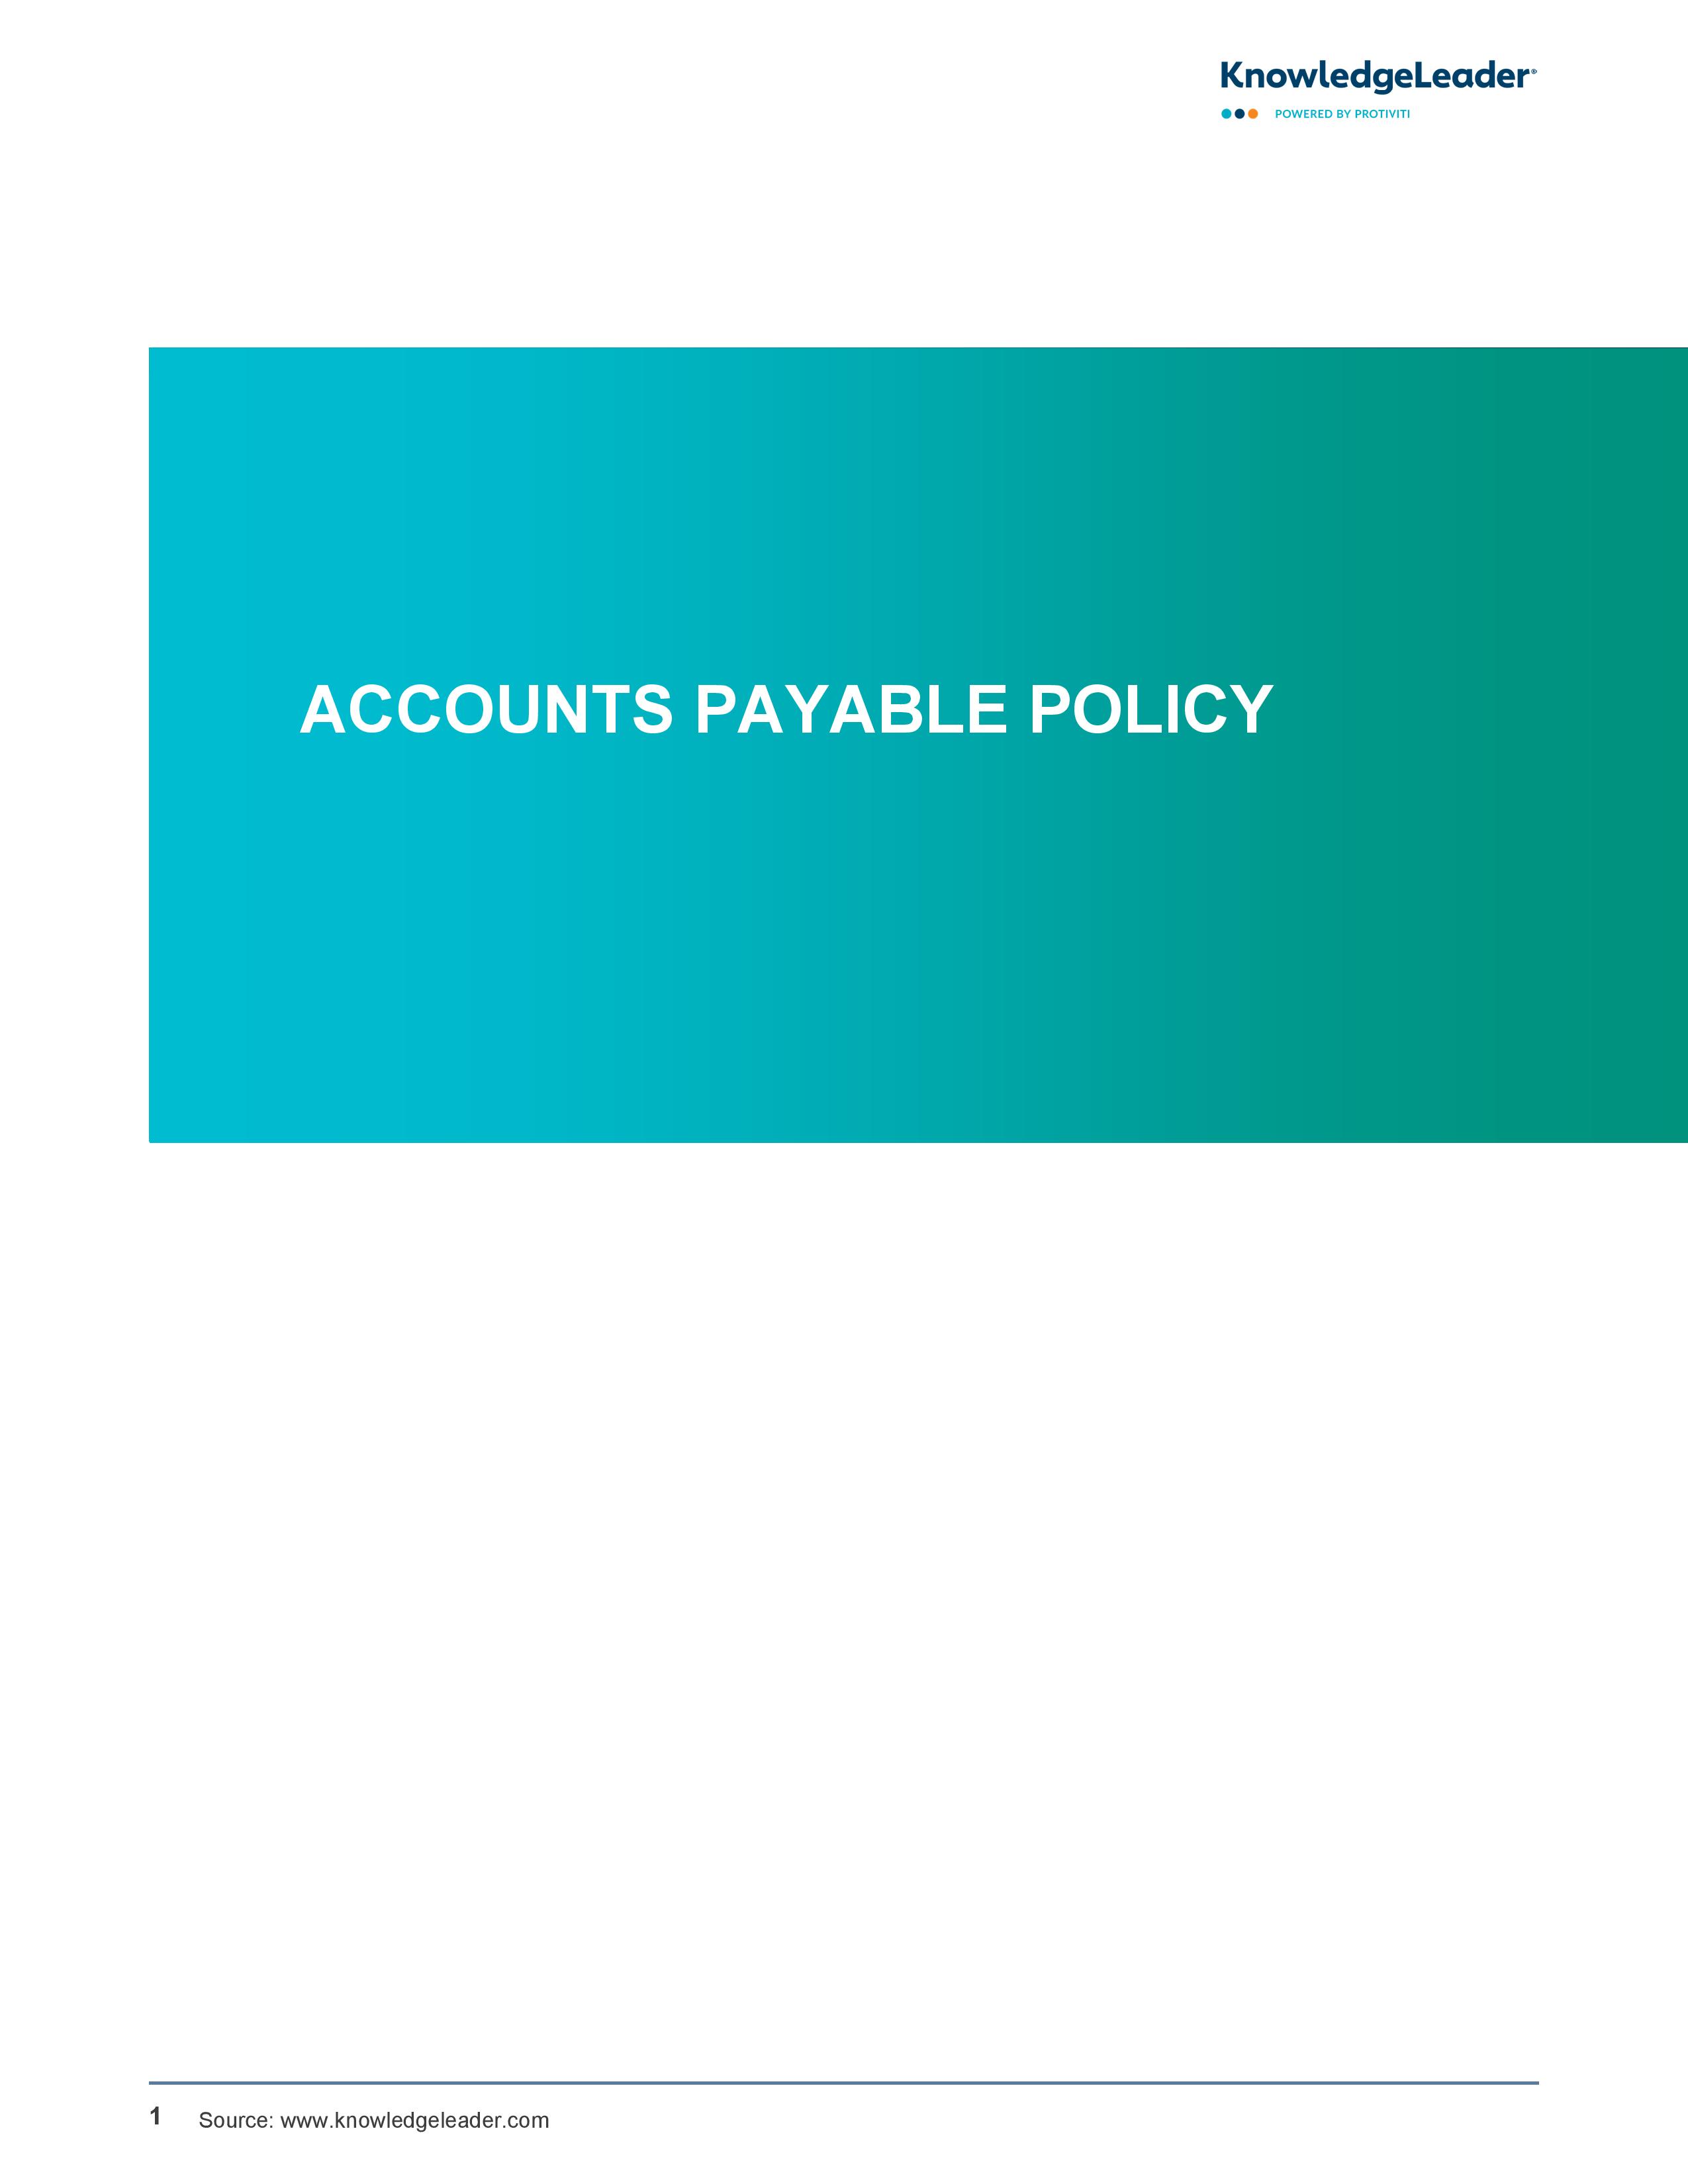 screenshot of the first page of Accounts Payable Policy